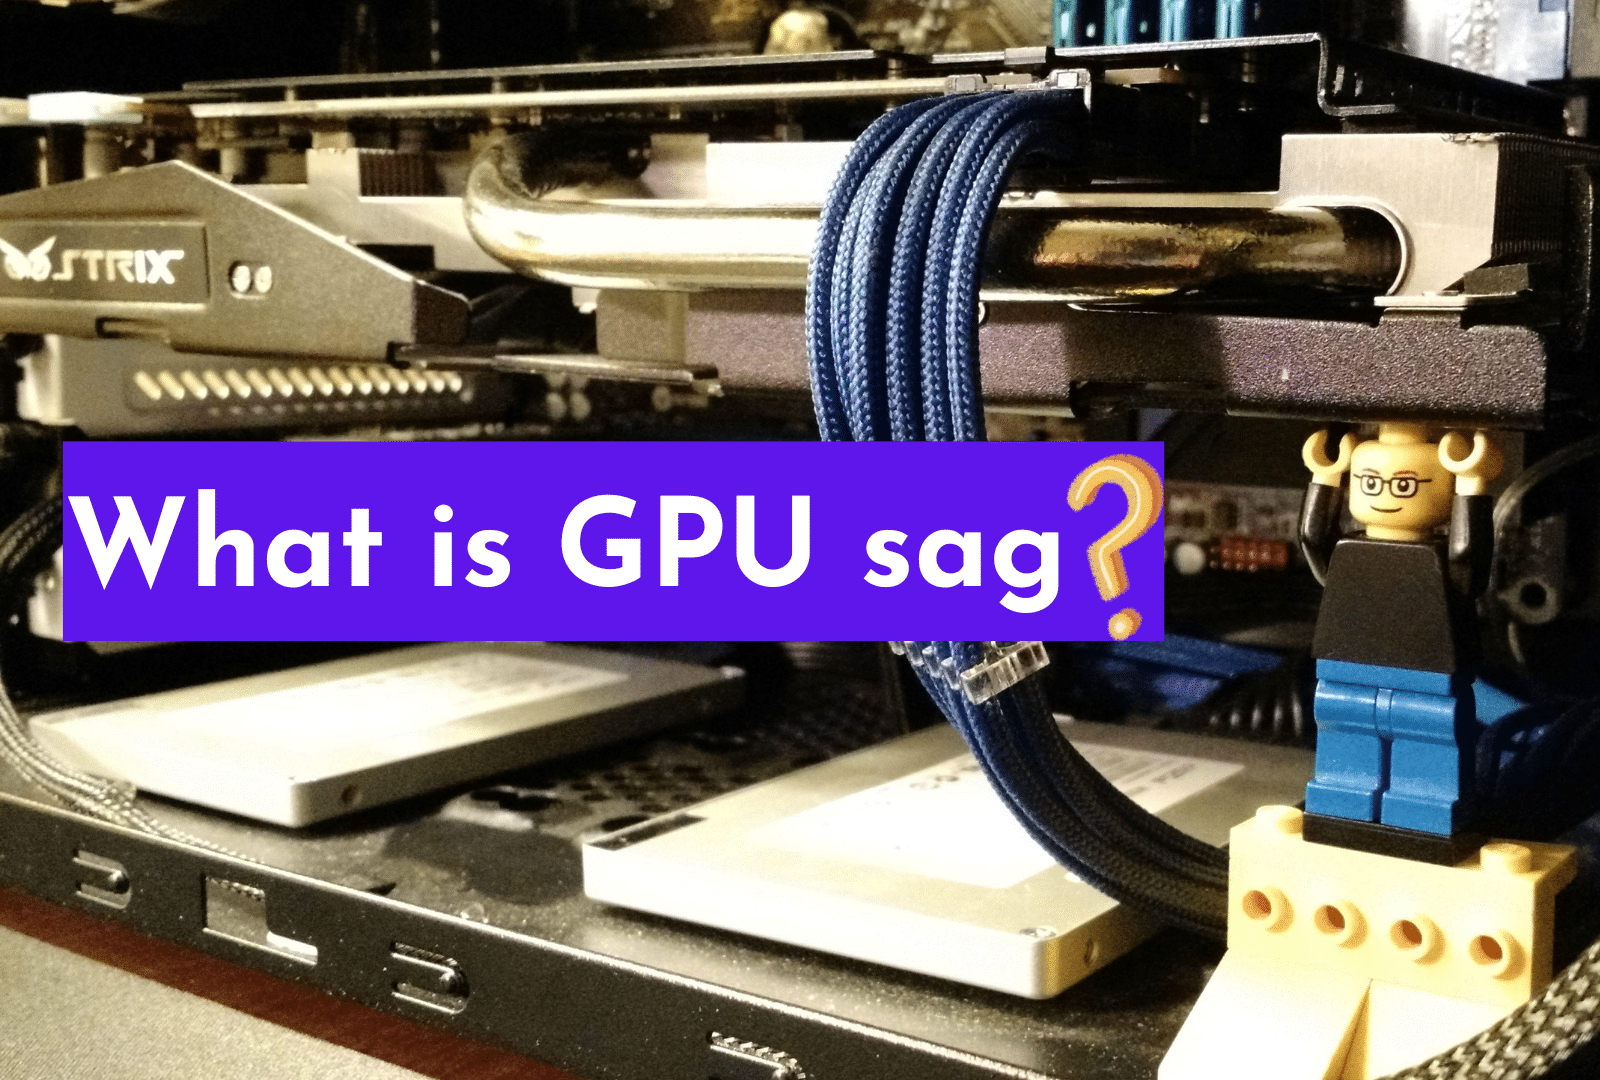 C:\Users\Mohsin\Downloads\How to Fix GPU Sag (1).png